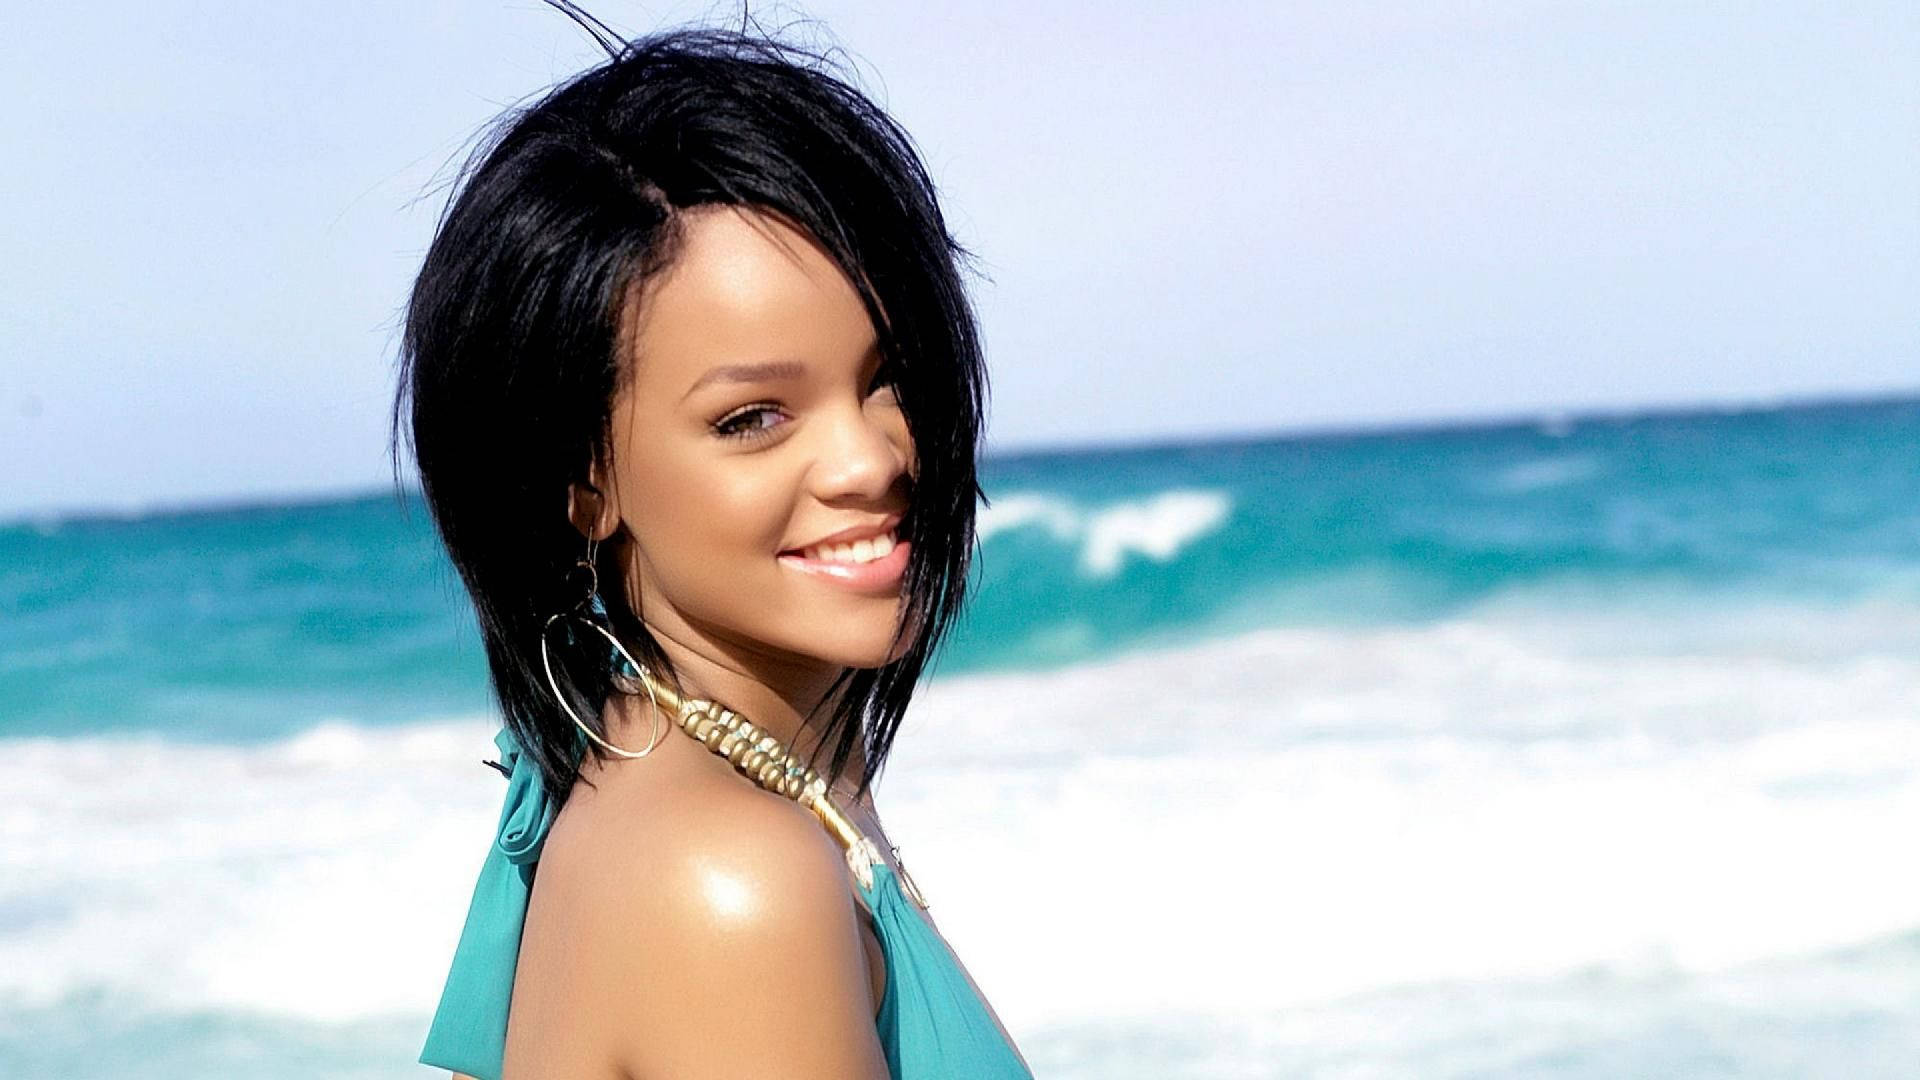 Songstress Rihanna Strikes A Pose In A Stunning Beach Photo Shoot Background